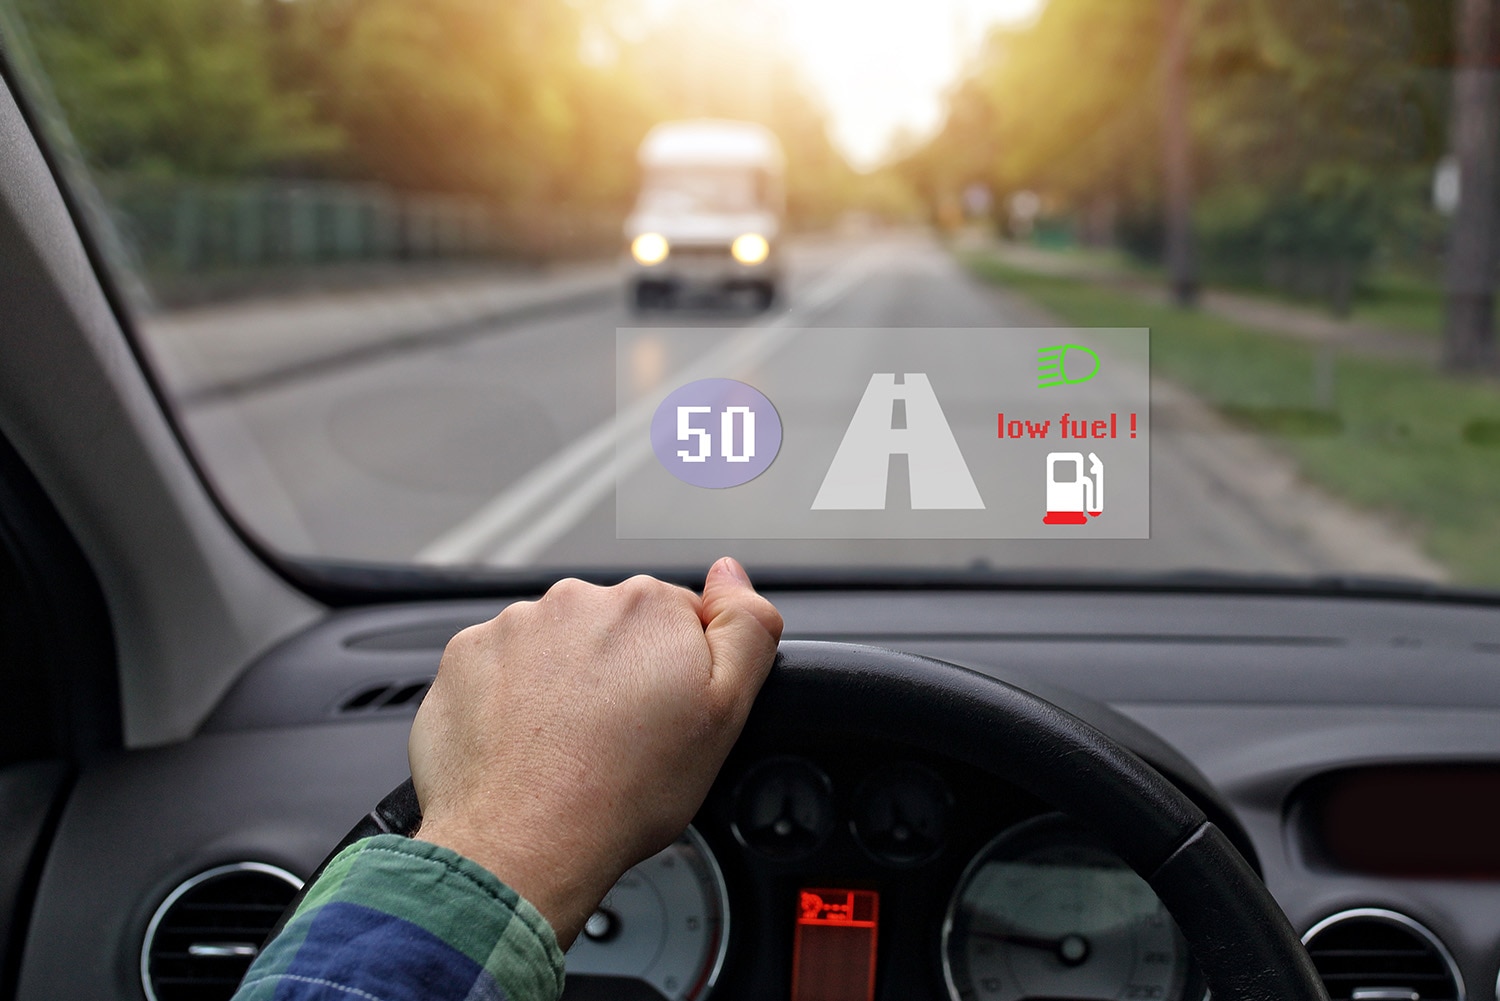 View from the driver's seat of a vehicle with a head-up display on the windshield